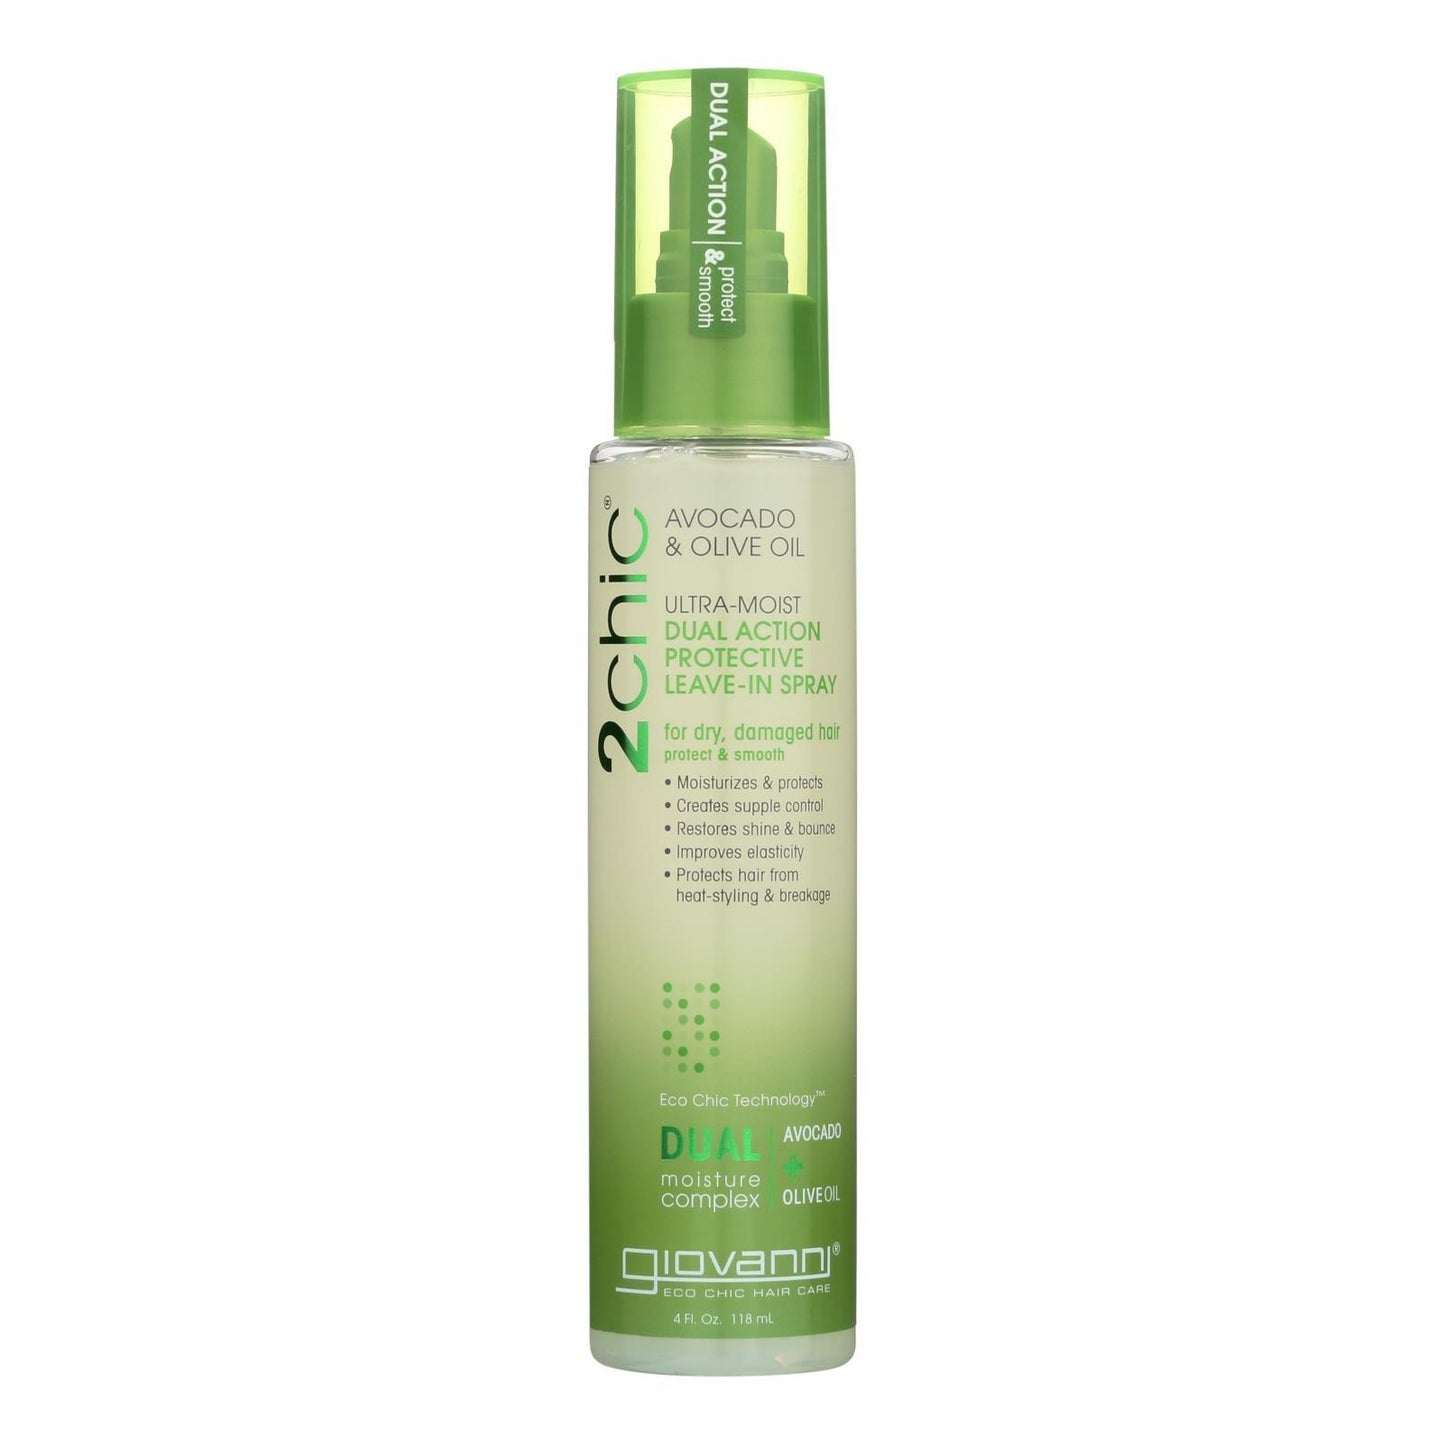 Giovanni Hair Care Products Spray Leave In Conditioner - 2chic Avocado - 4 Oz - Loomini